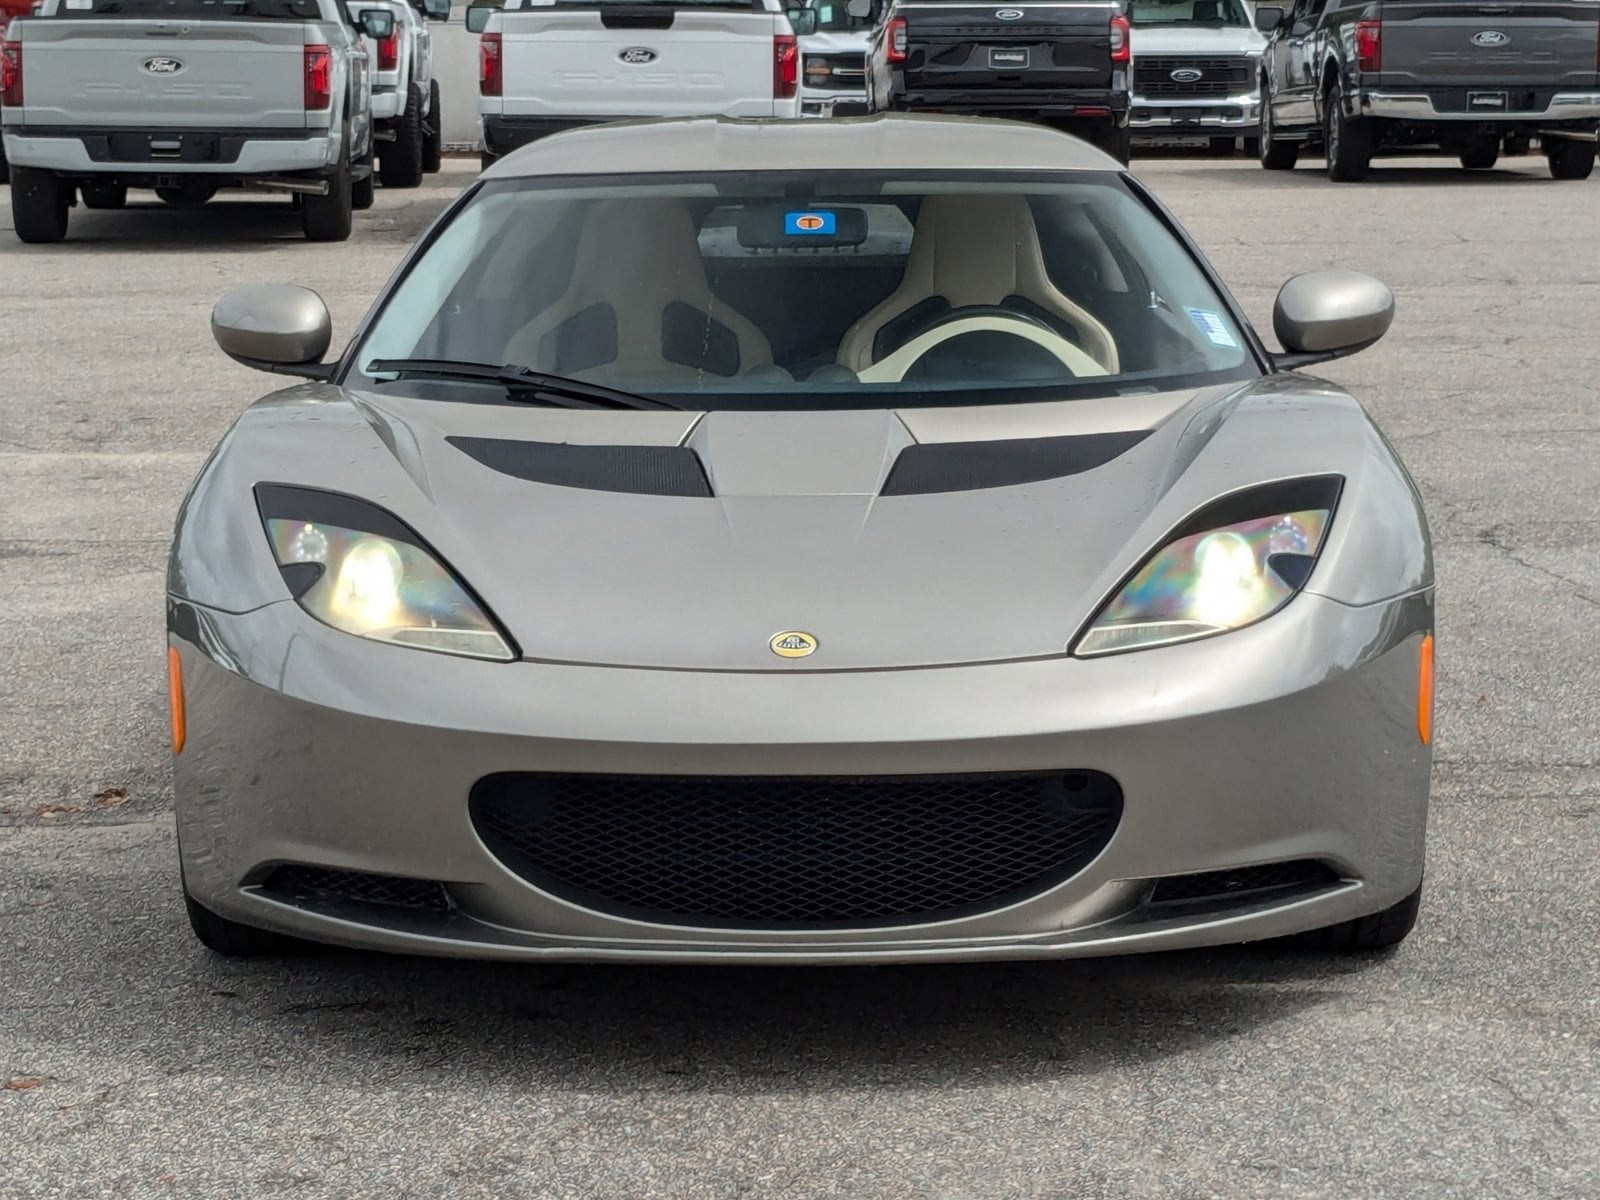 Used 2011 Lotus Evora 2+2 with VIN SCCLMDTU1BHA11182 for sale in Maitland, FL